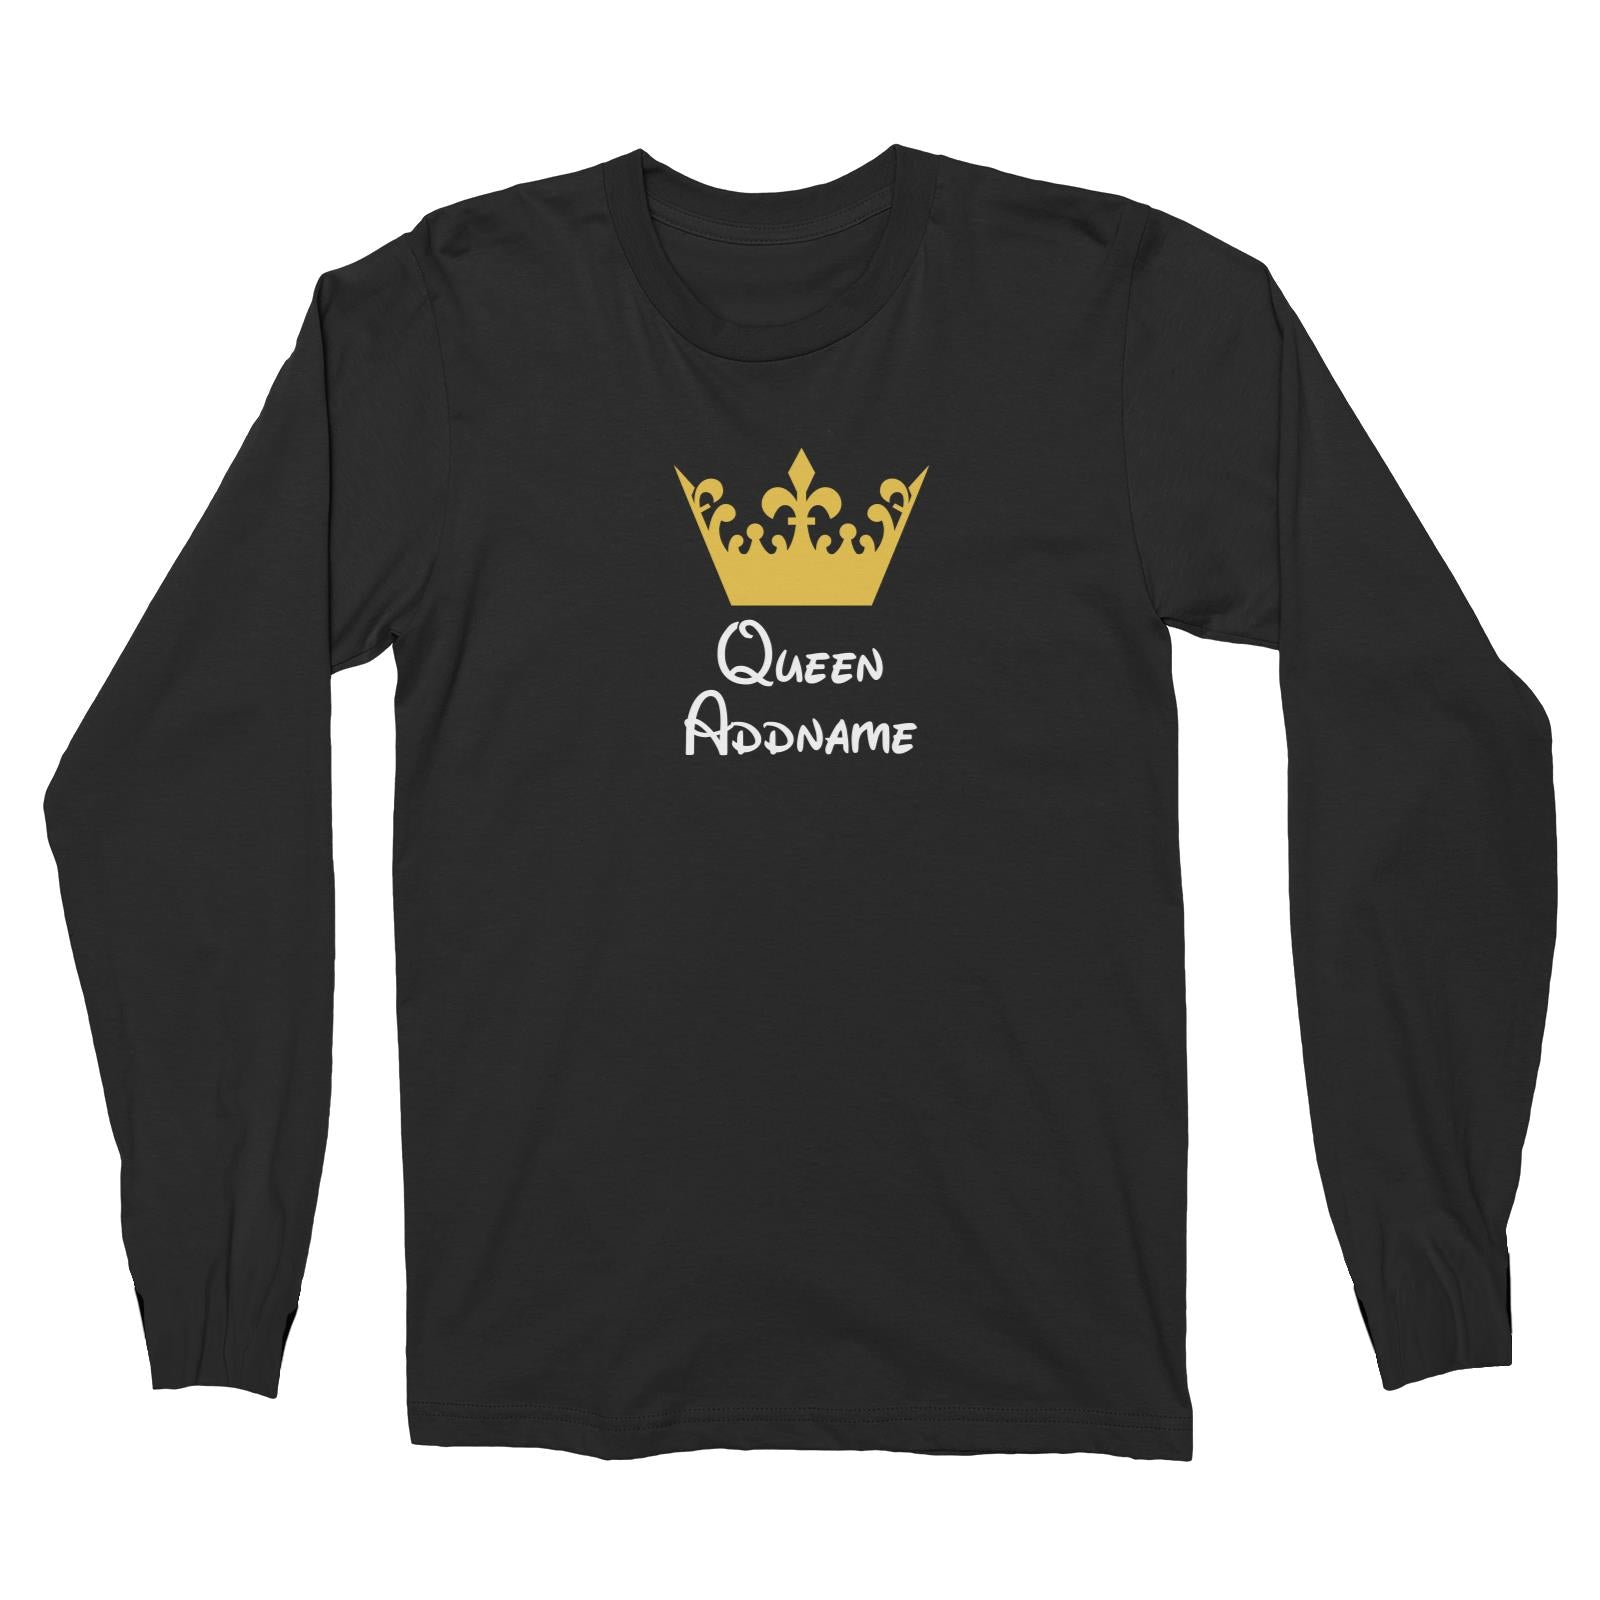 Royal Queen with Tiara Addname Long Sleeve Unisex T-Shirt  Matching Family Personalizable Designs